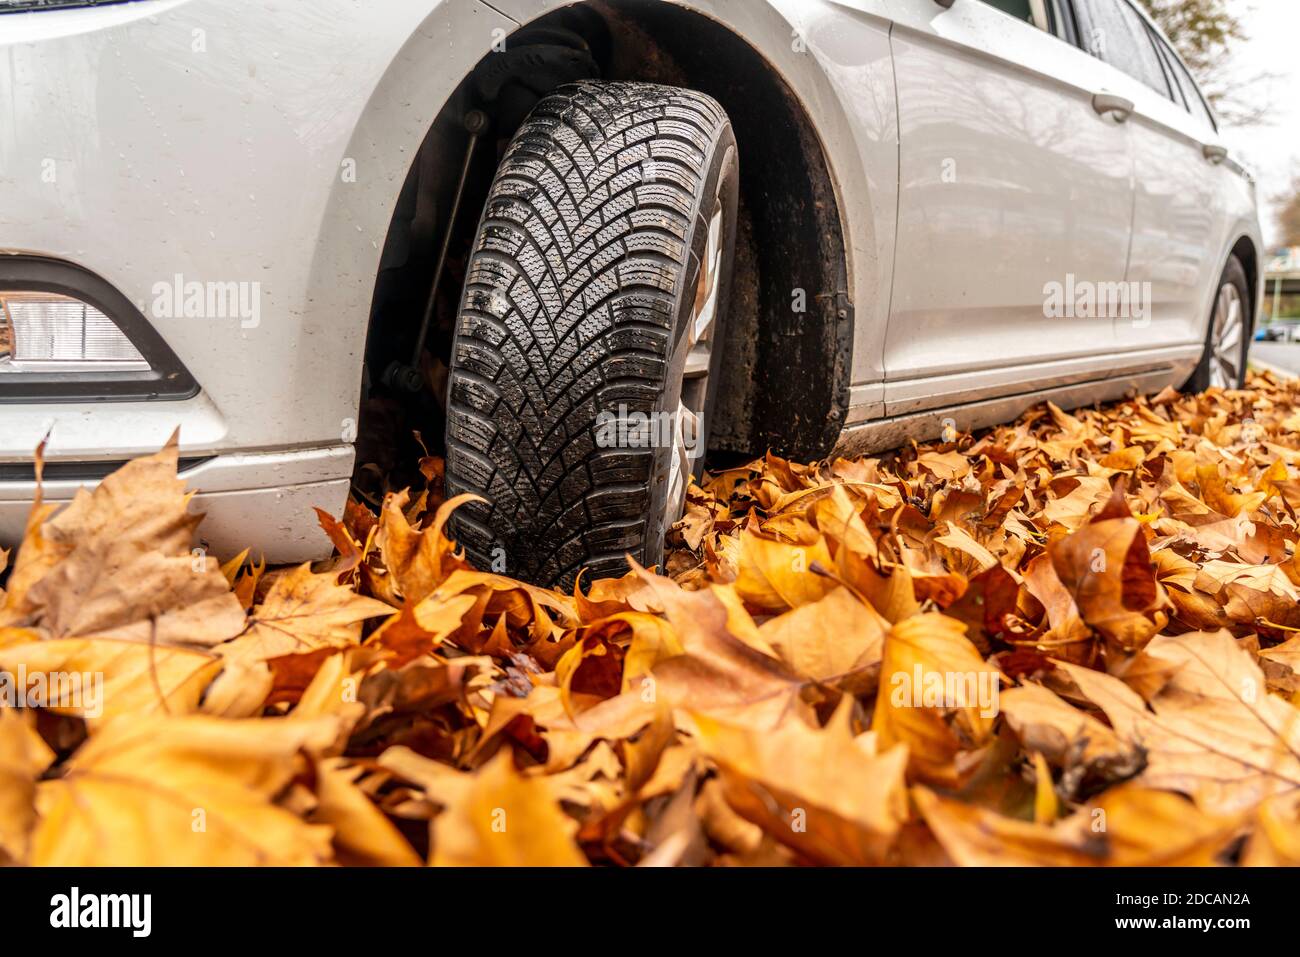 Car, Driving on autumn leaves, slippery ground, leaves, grip through winter tyres, Stock Photo